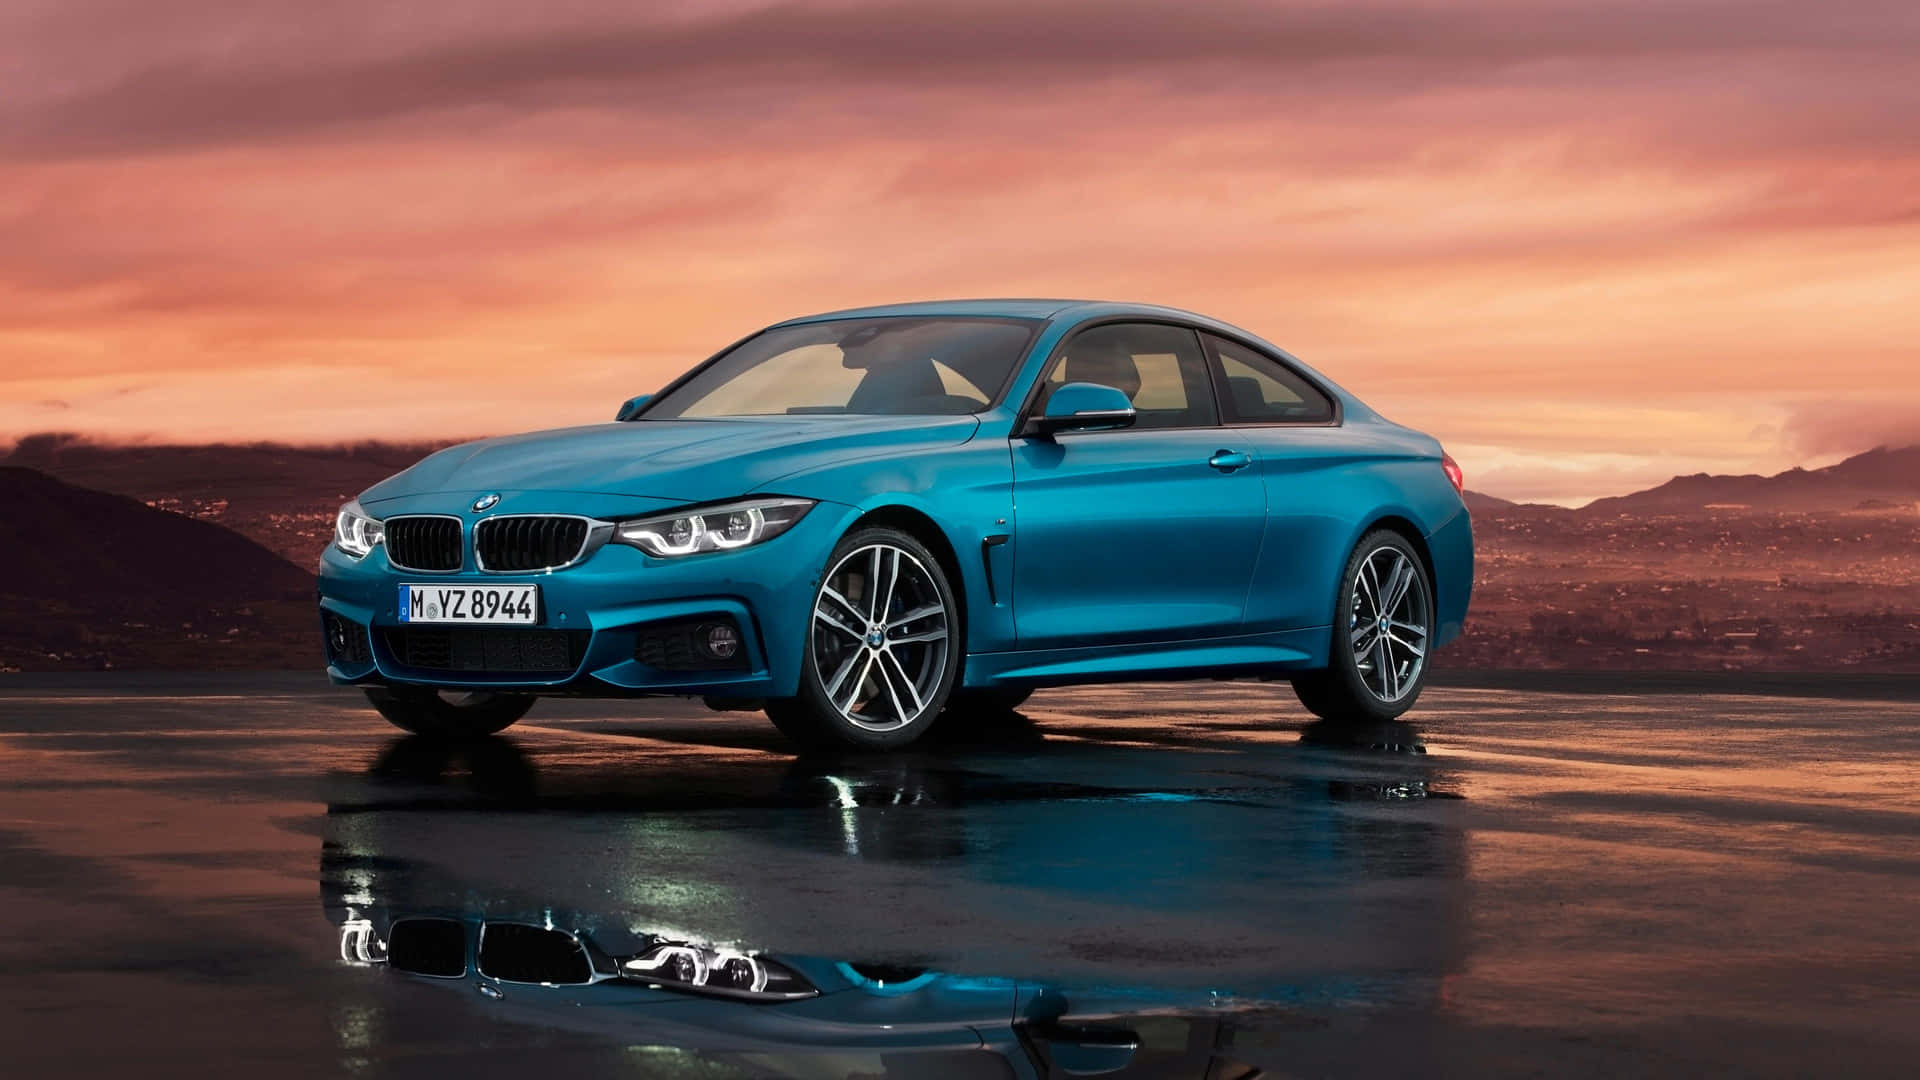 Sleek and Powerful BMW 4 Series in Action Wallpaper